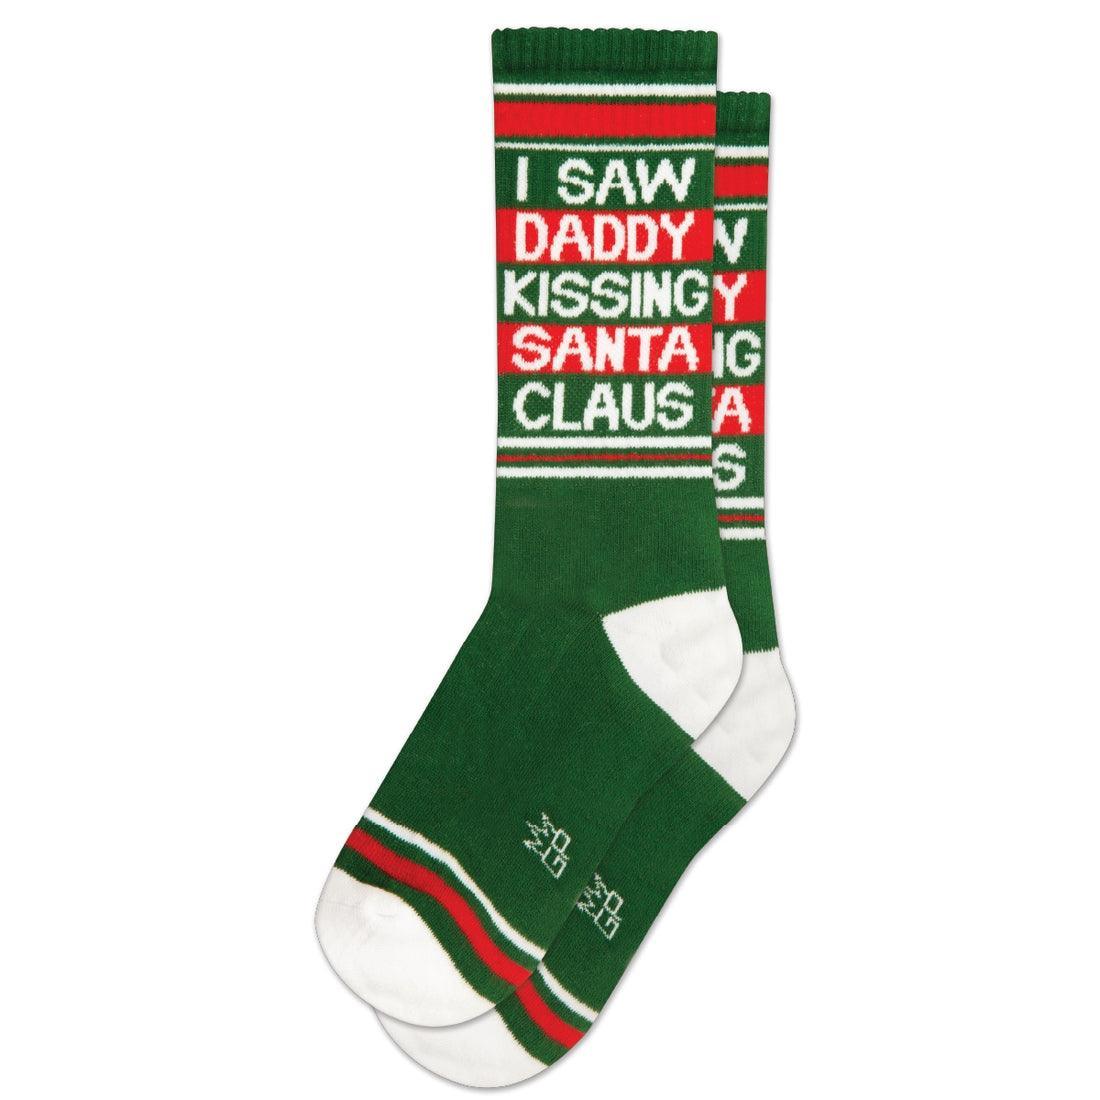 I Saw Daddy Kissing Santa Clause Ribbed Gym Socks - Gumball Poodle - The Sock Monster